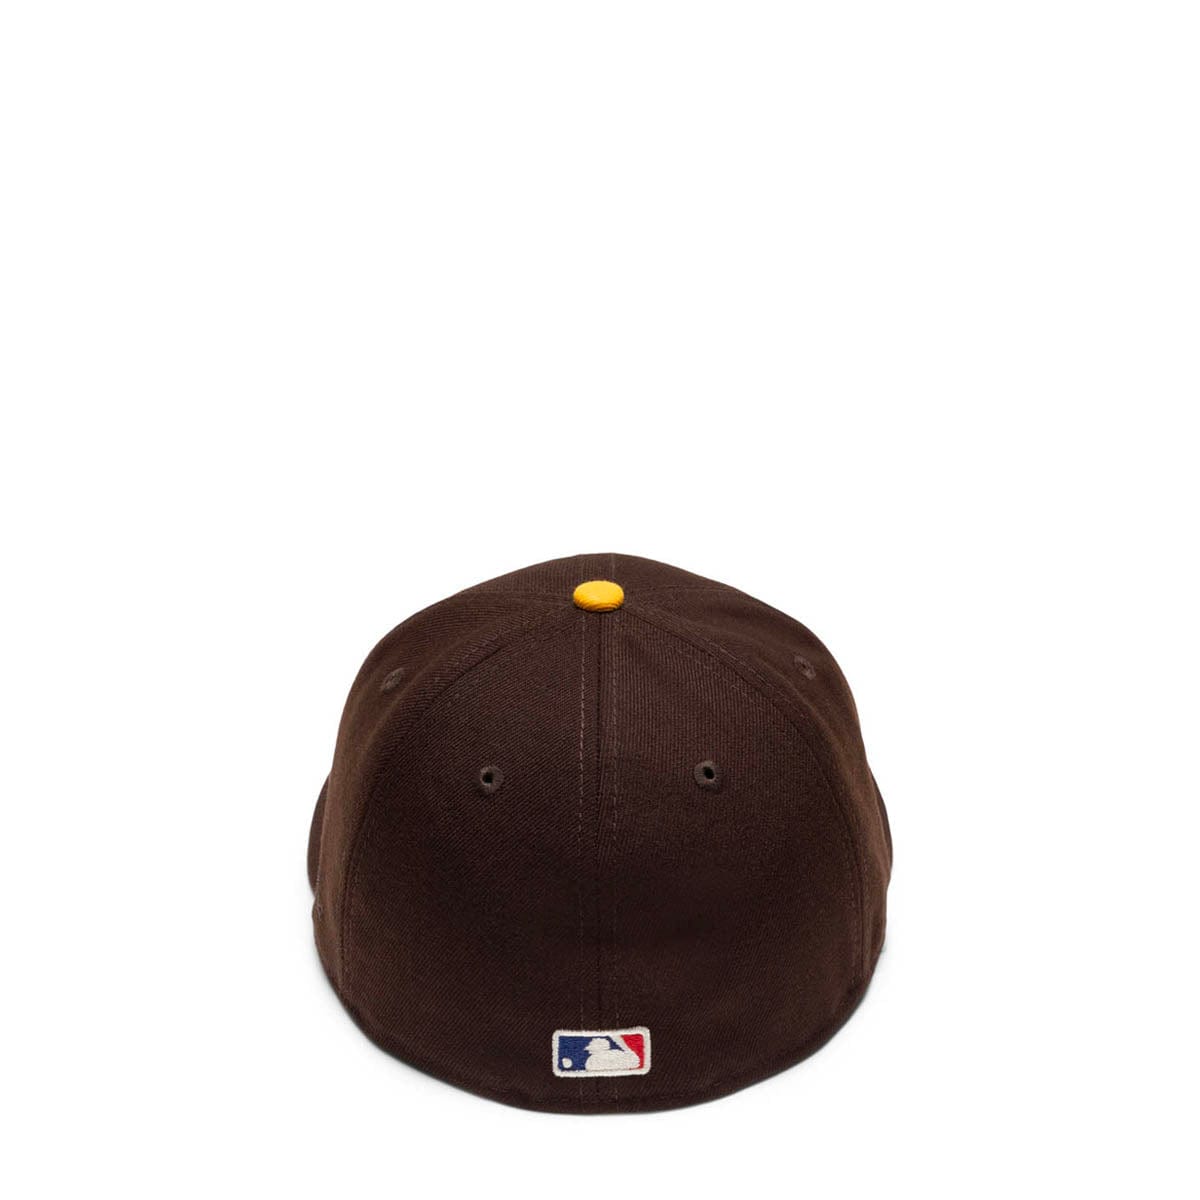 New Era X FOG 59FIFTY SAN DIEGO PADRES FITTED CAP BROWN